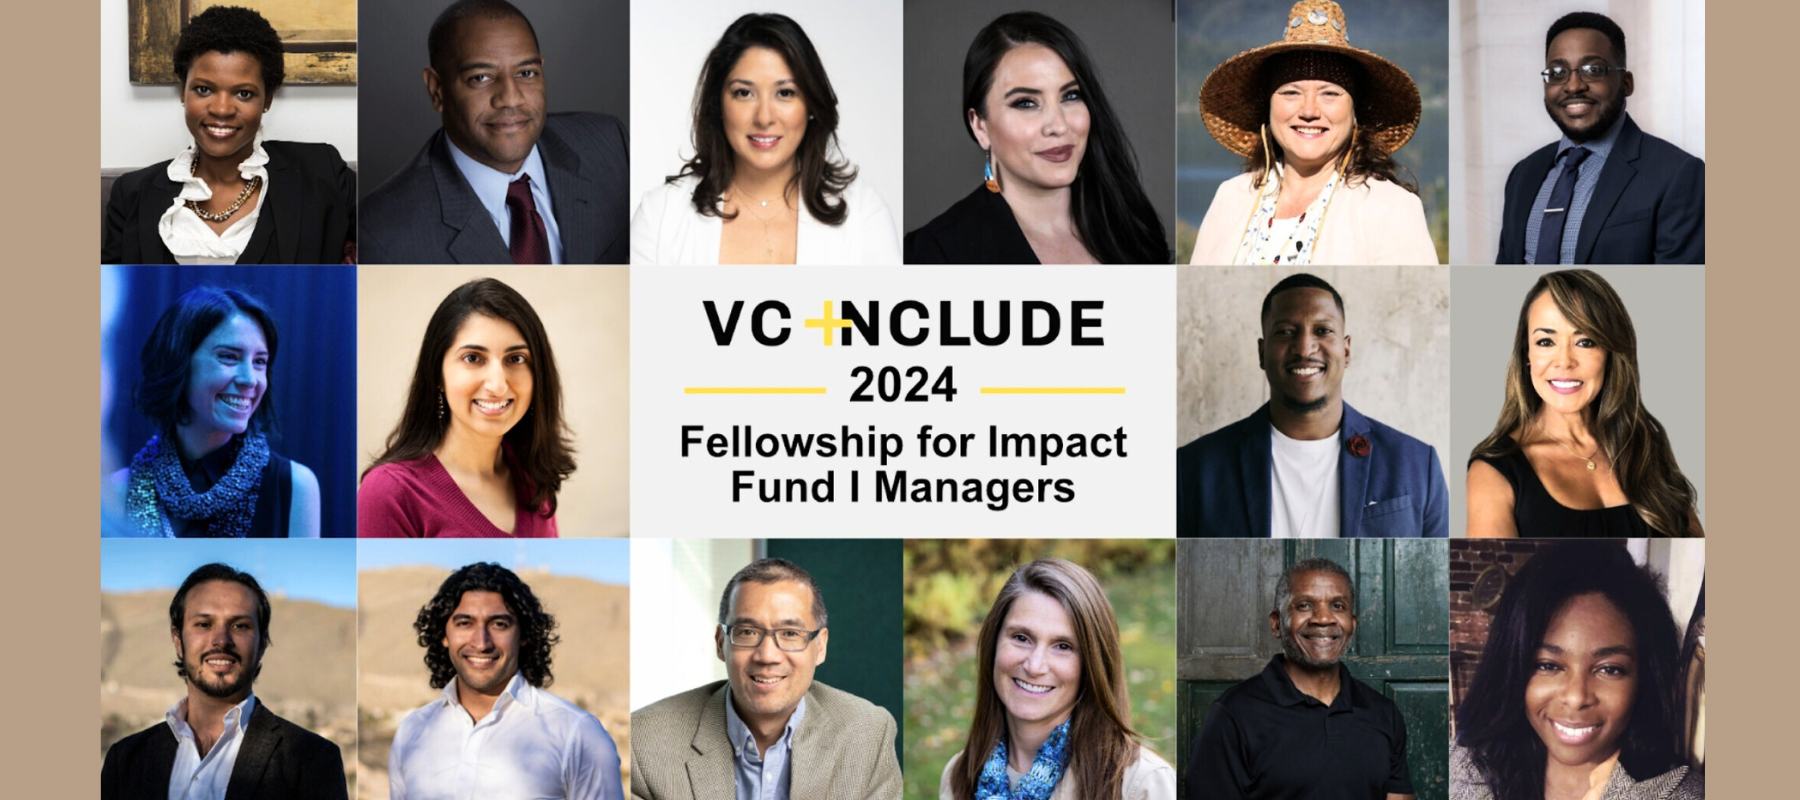 VC Include announces 2024 cohort for Fellowship for Impact Fund I Managers